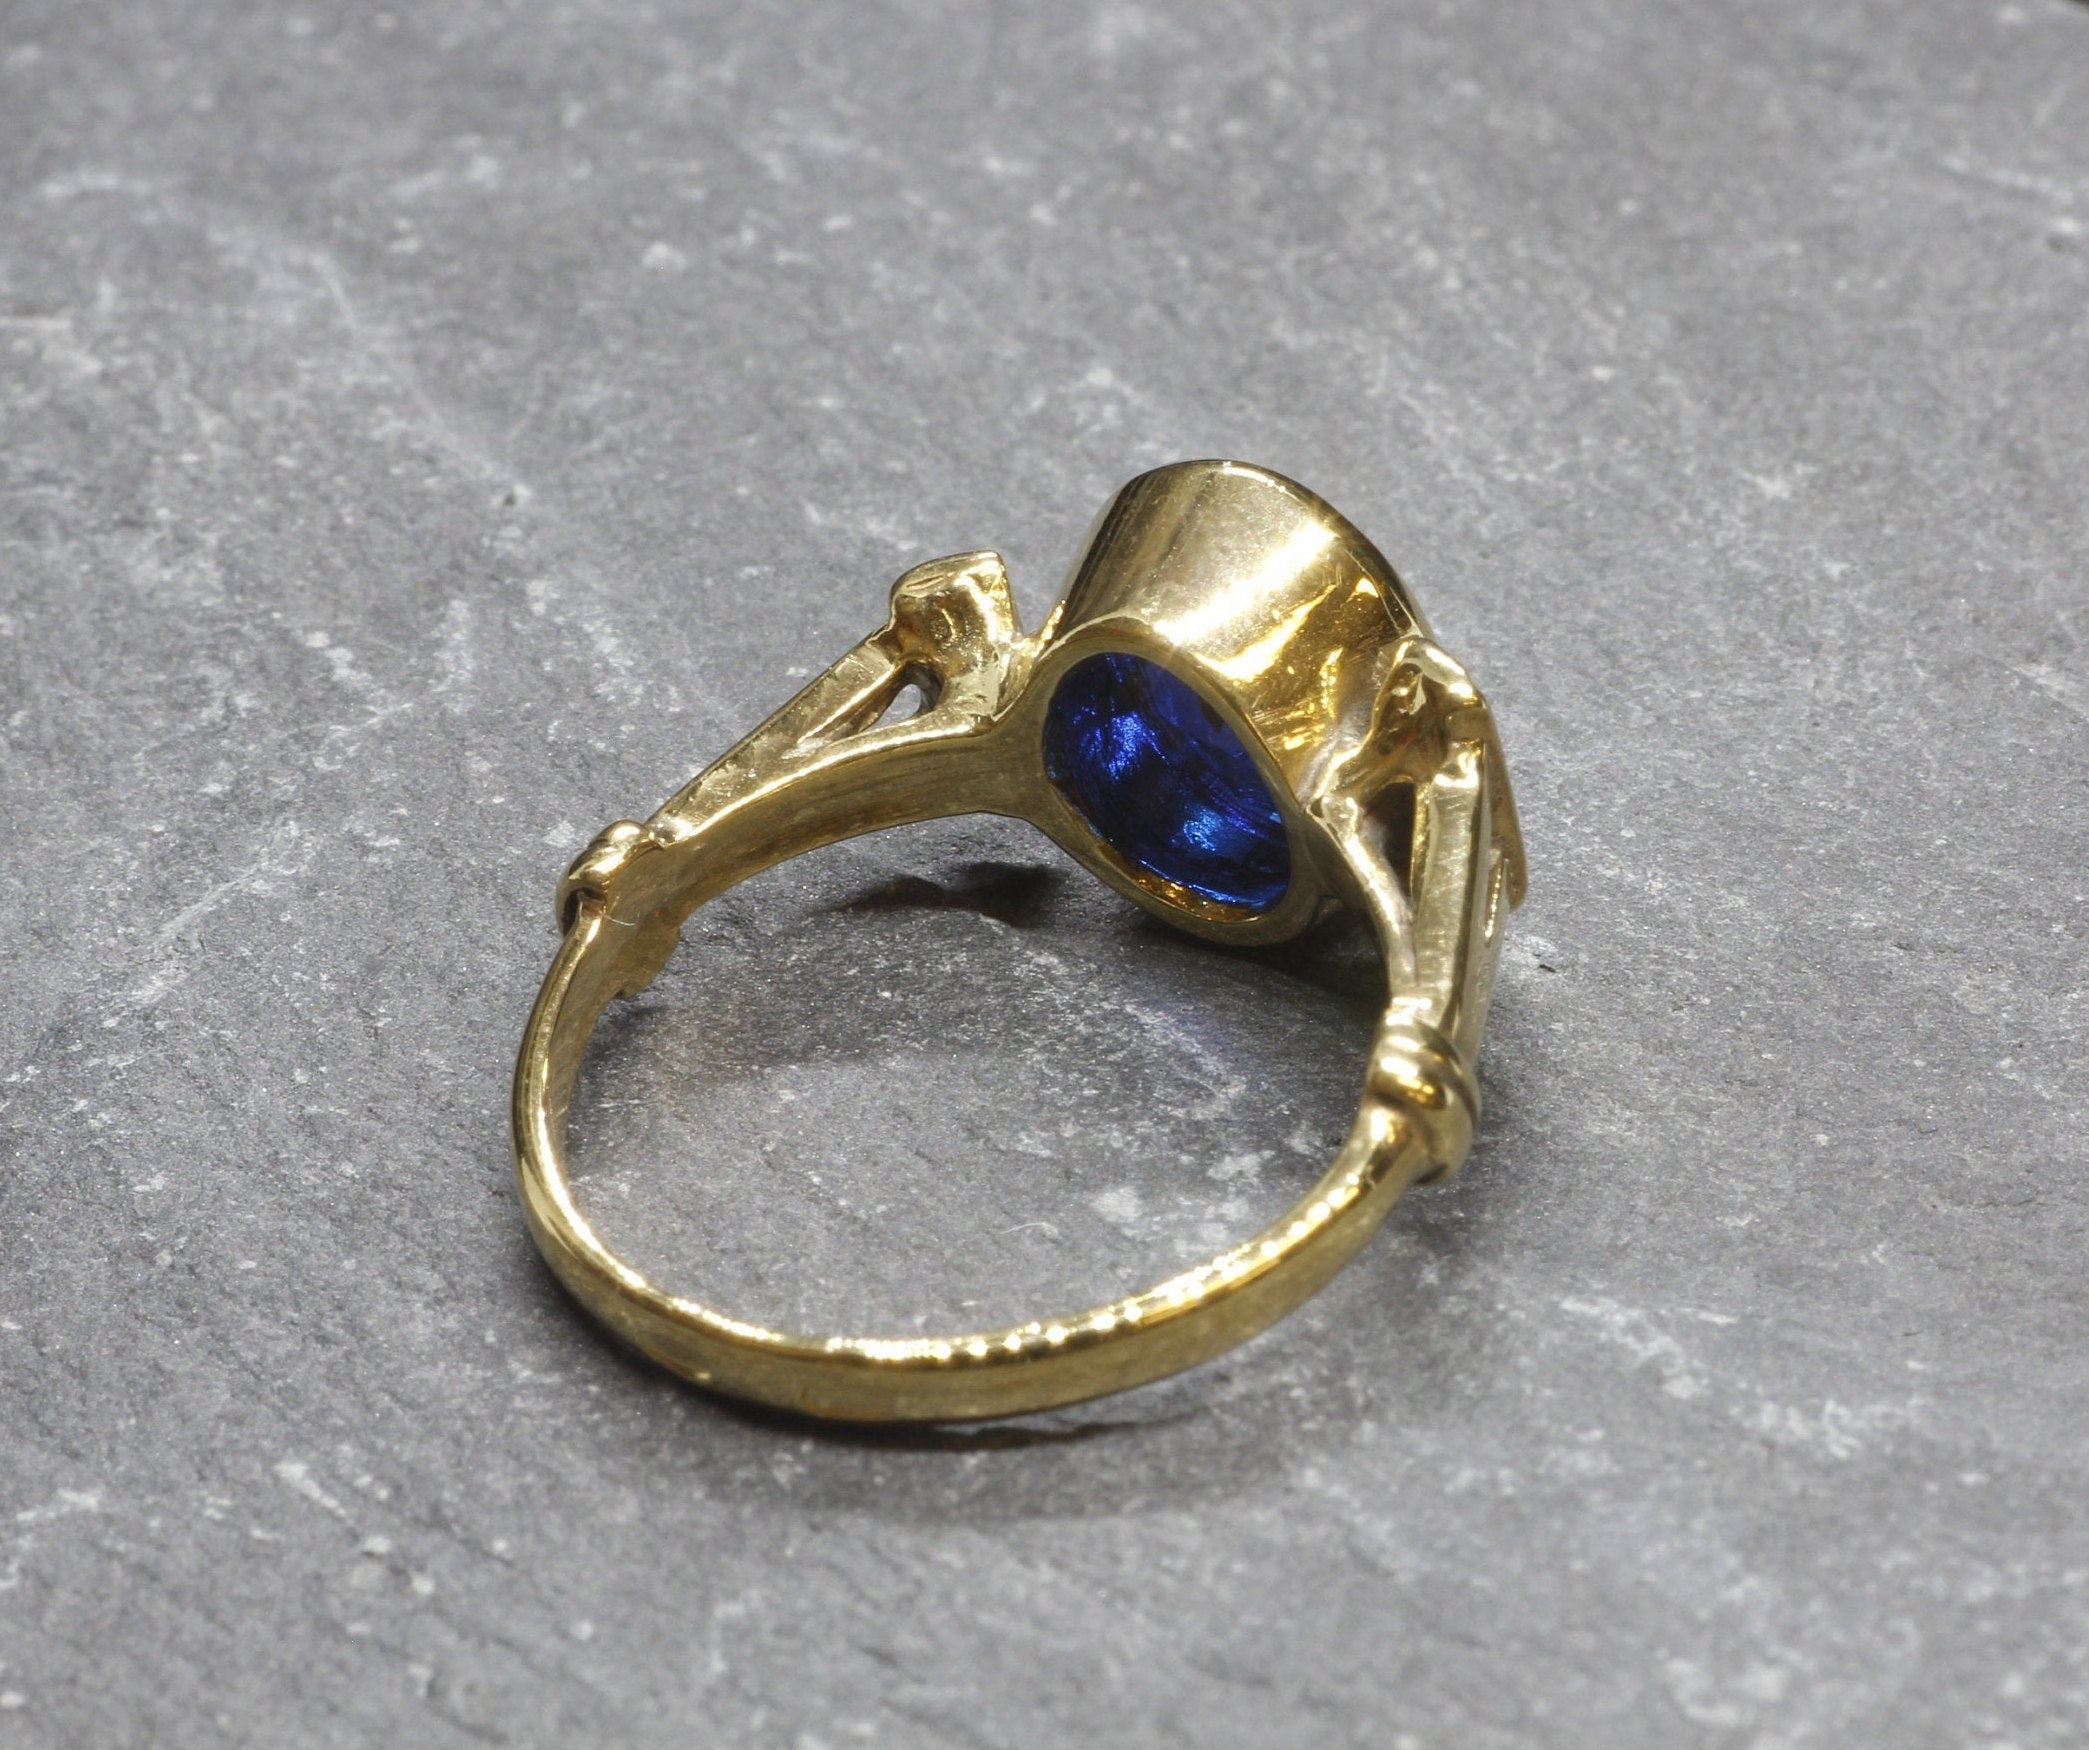 Blue Sapphire Ring, Created Sapphire, Gold Ring, Antique Ring, Promise Ring, Gold Plated Ring, Vintage Ring, Royal Blue Ring, Sapphire Ring